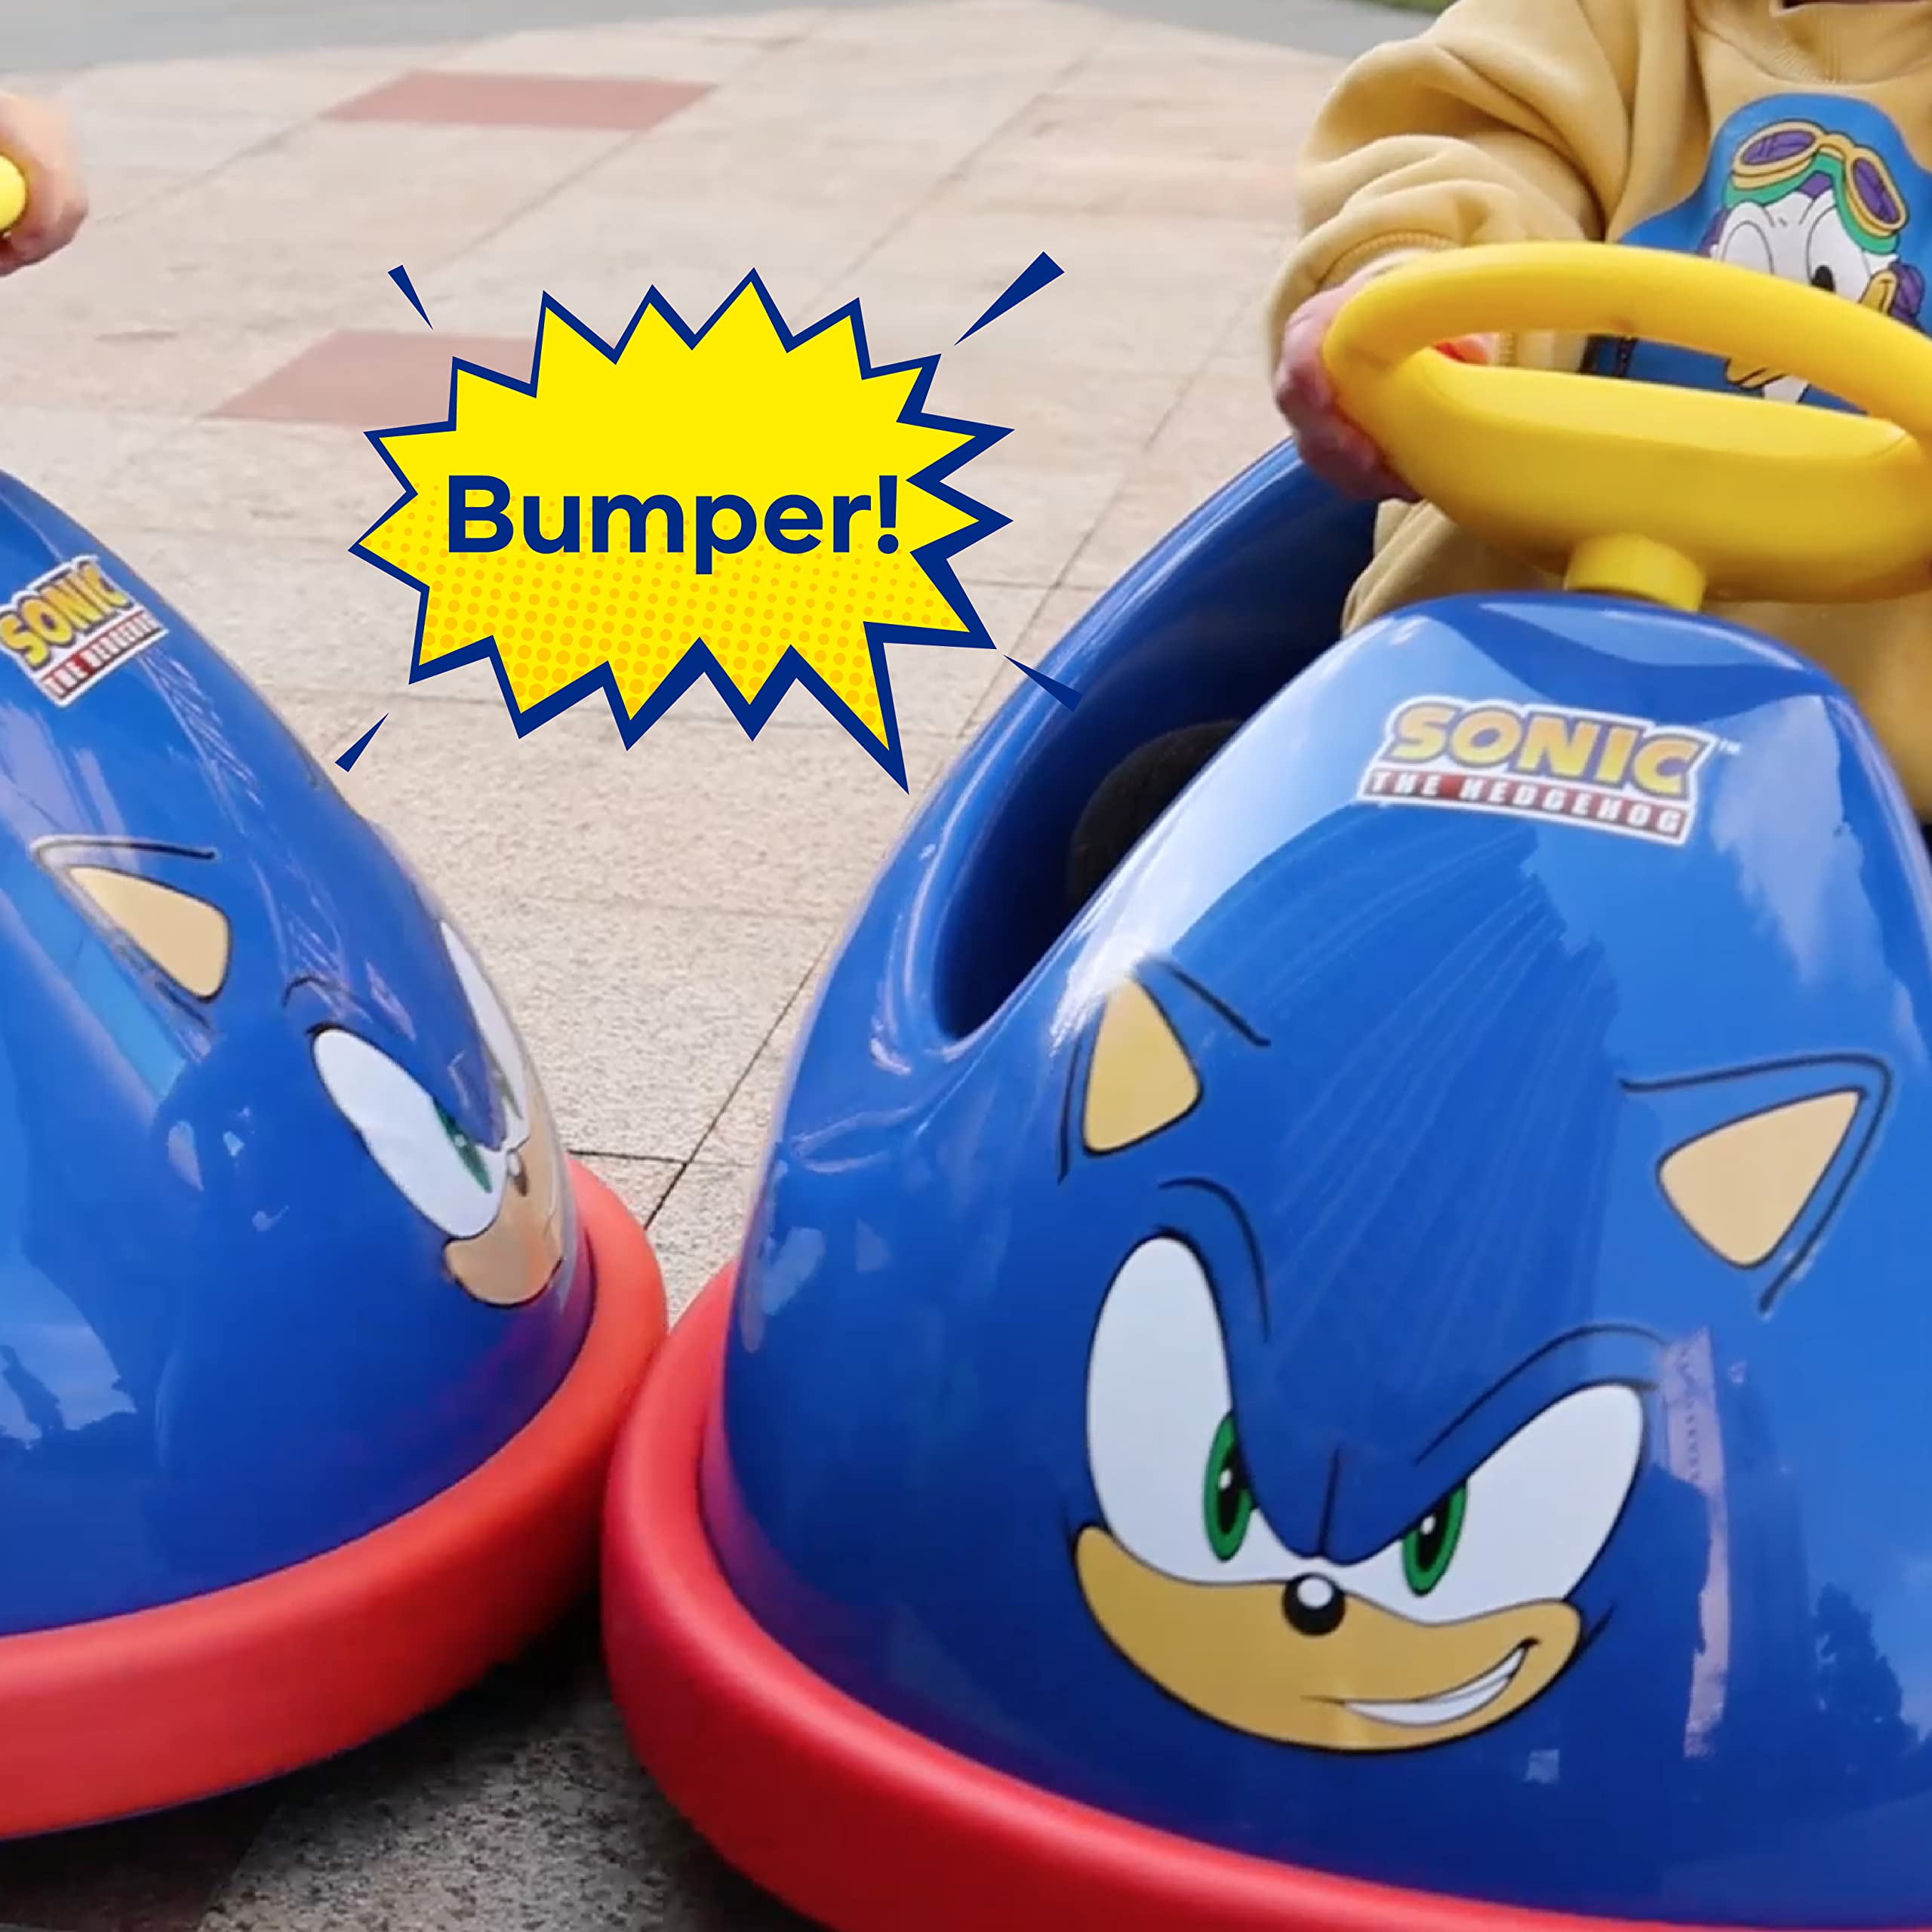 Sakar Sonic The Hedgehog Bumper Car for Kids, 2 Speed Electric Vehicle, Toddler Bumper Car with Remote Control and 360 Degree Turning, 12V 20W Motor, LED Lights, Gifts for Toddlers, Large